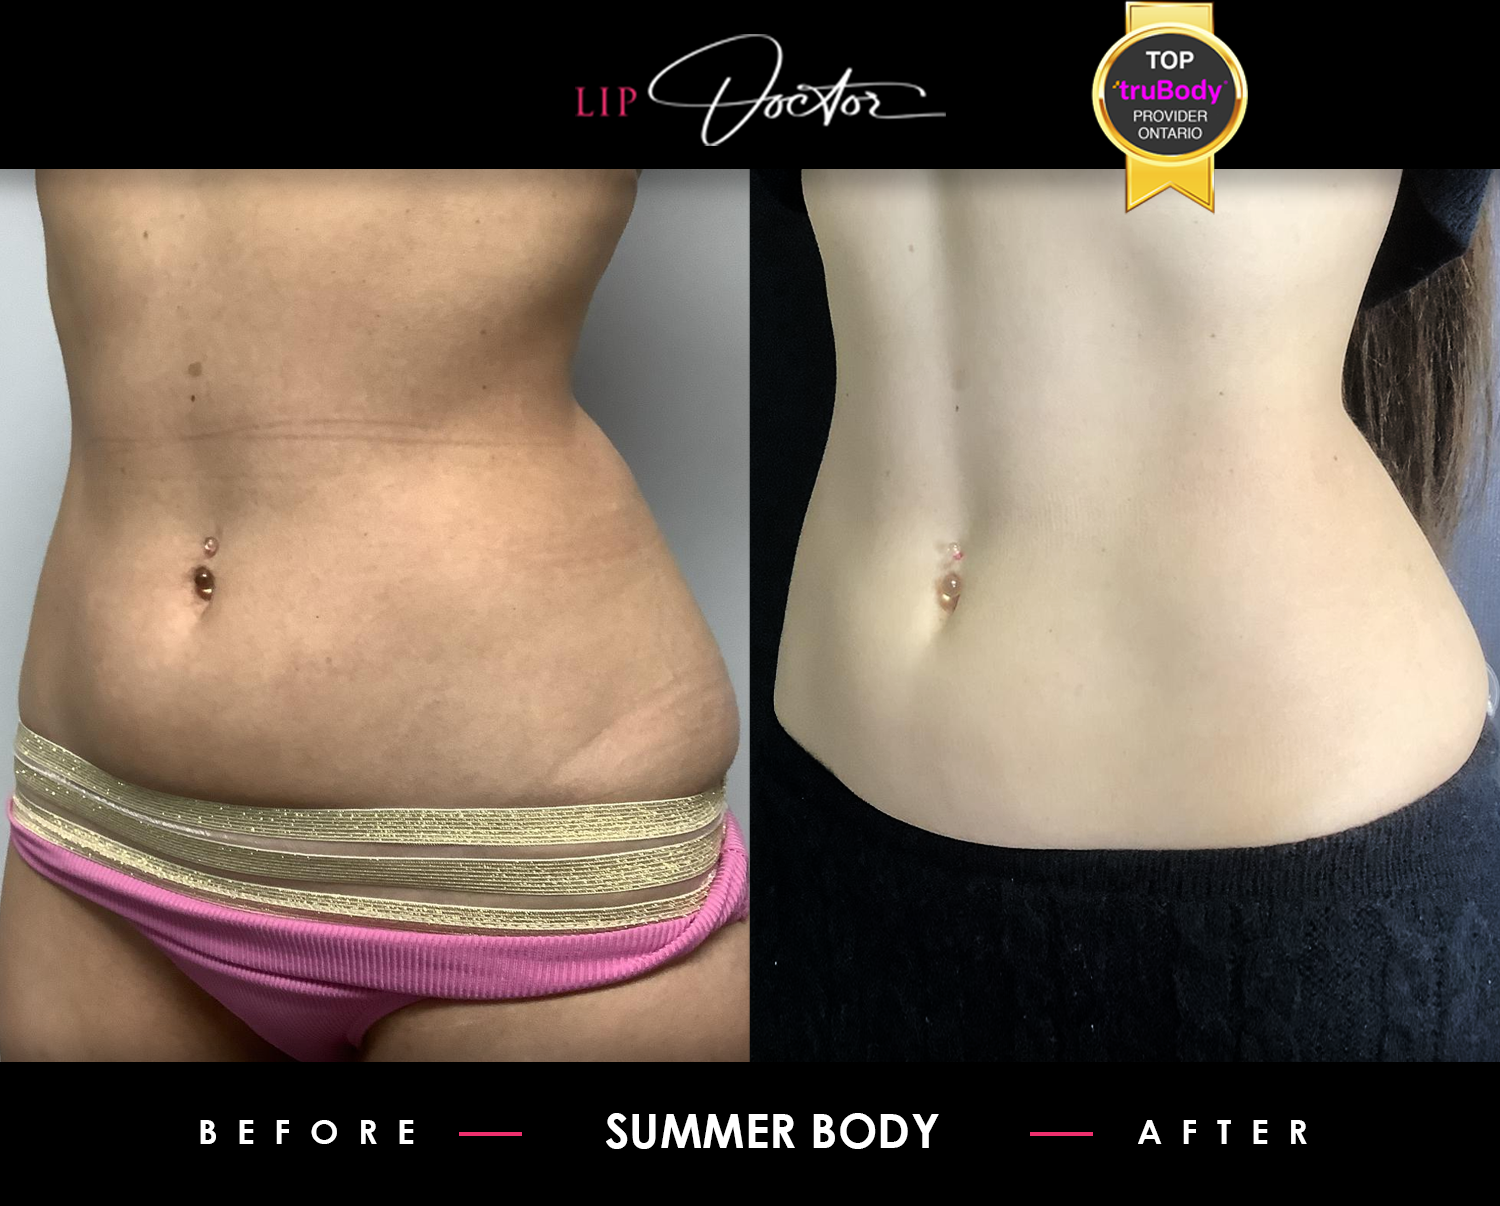 Before and after images showcasing significant belly fat reduction and enhanced muscle definition from TruBody treatments at Lip Doctor in Mississauga and Oakville.